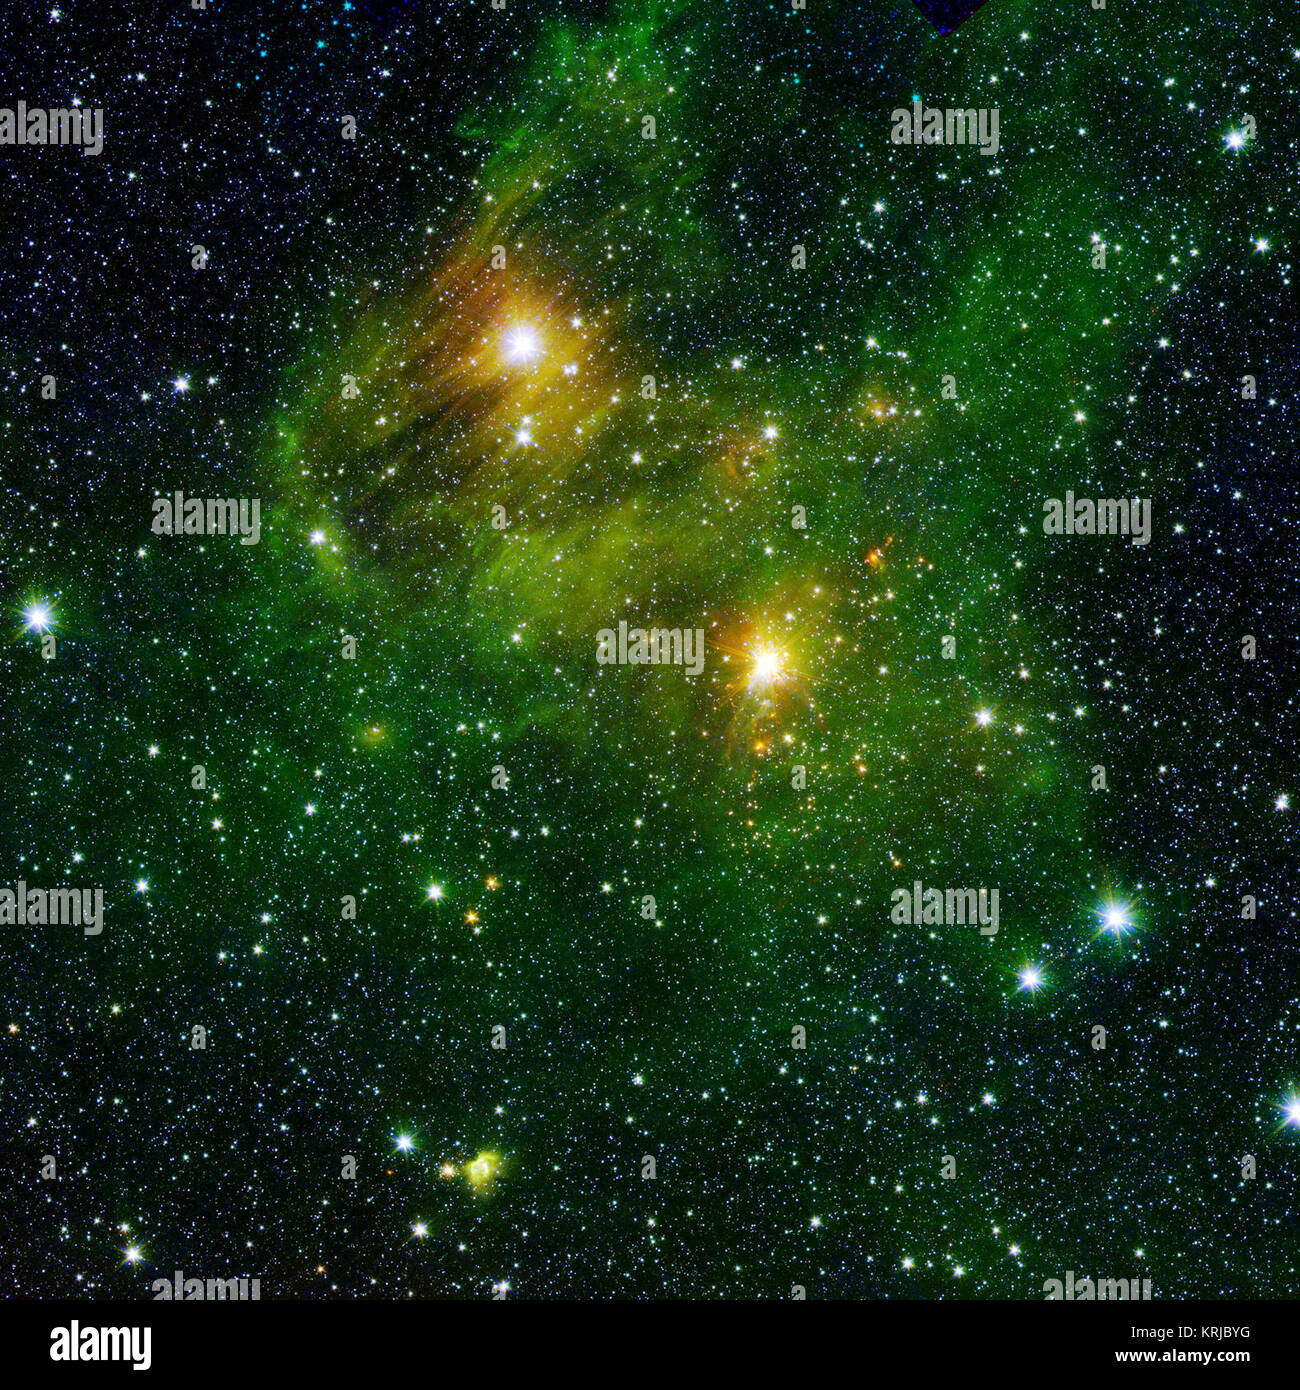 Two extremely bright stars illuminate a greenish mist in this and other images from the new GLIMPSE360 survey. This fog is comprised of hydrogen and carbon compounds called polycyclic aromatic hydrocarbons (PAHs), which are found right here on Earth in sooty vehicle exhaust and on charred grills. In space, PAHs form in the dark clouds that give rise to stars. These molecules provide astronomers a way to visualize the peripheries of gas clouds and study their structures in great detail. PAHs are not actually "green;" a representative color coding in these images lets scientists observe PAHs glo Stock Photo